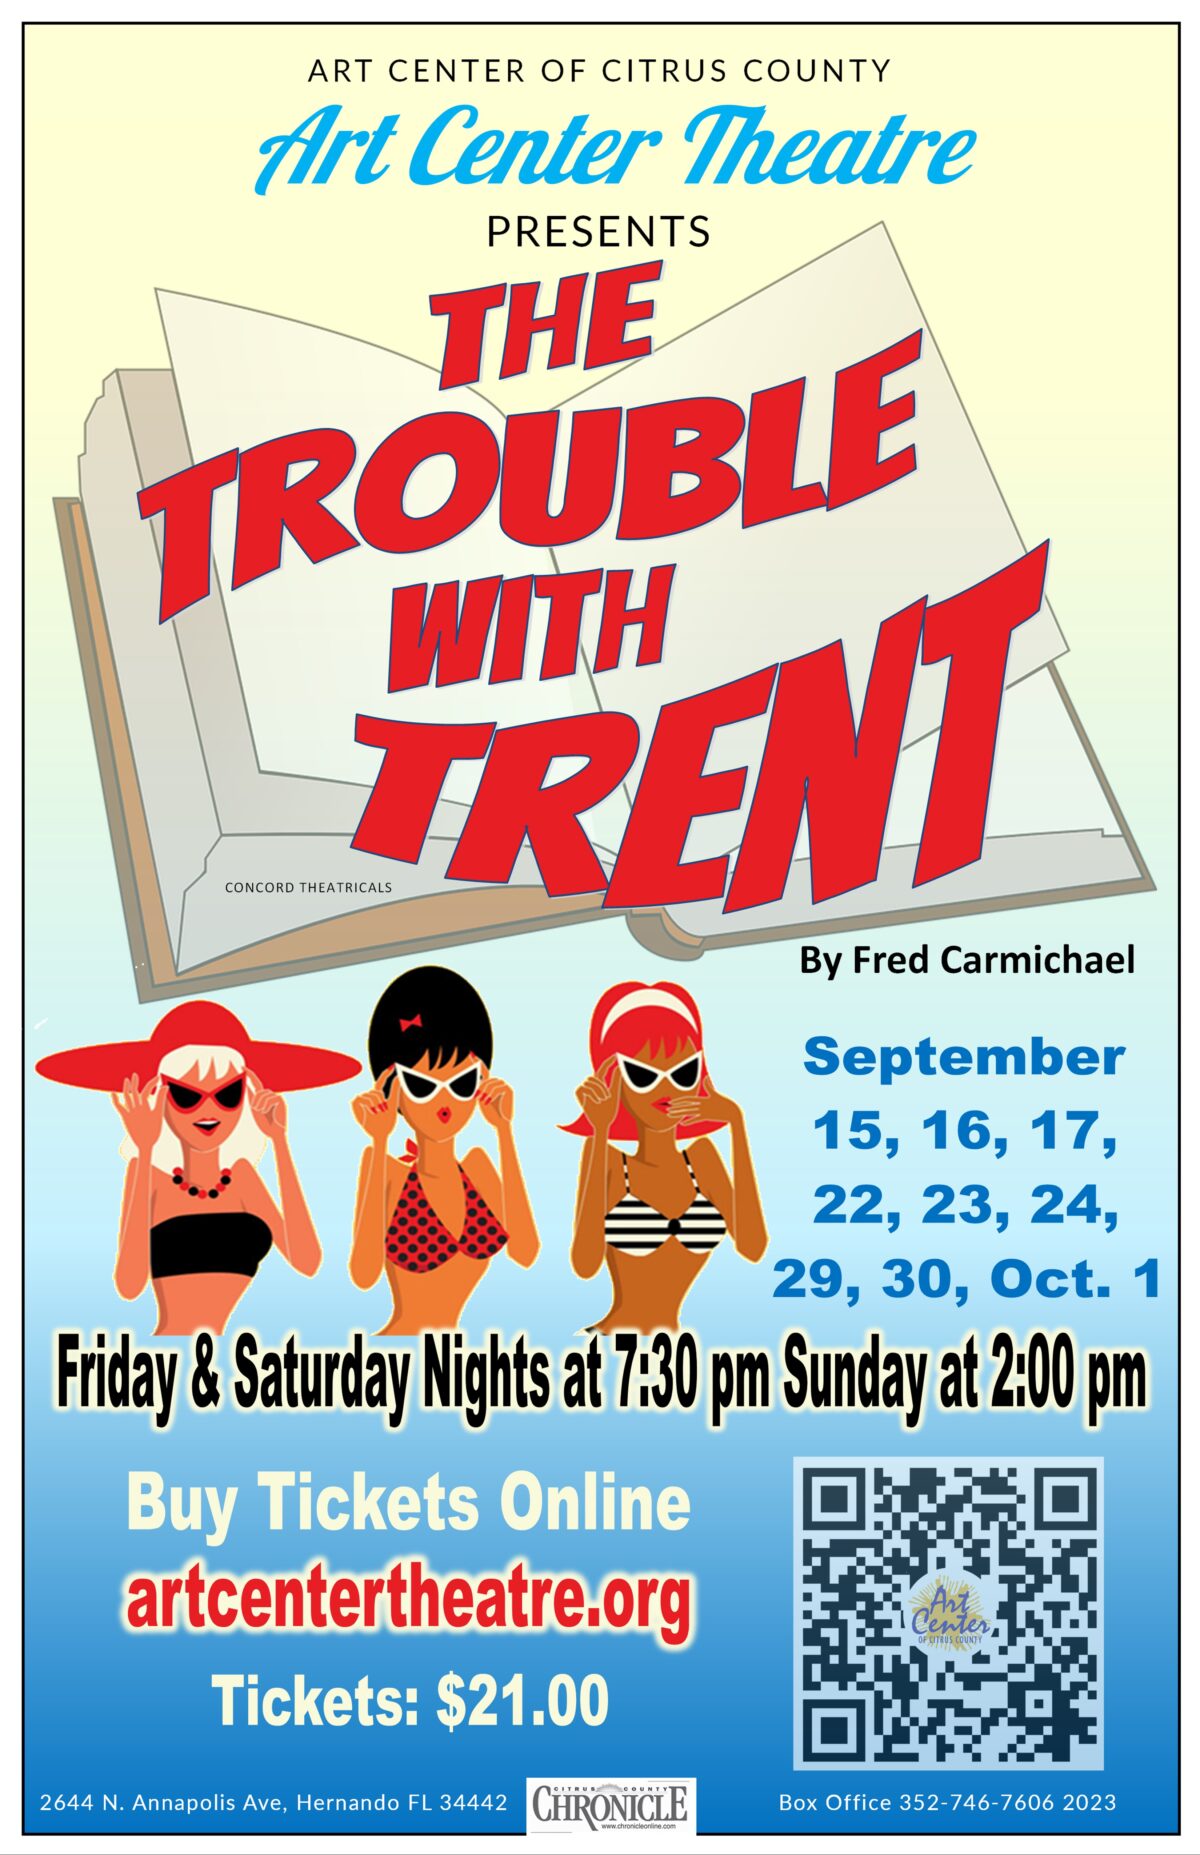 Art Center Theatre Presents: The Trouble With Trent Sept.15- Oct.1